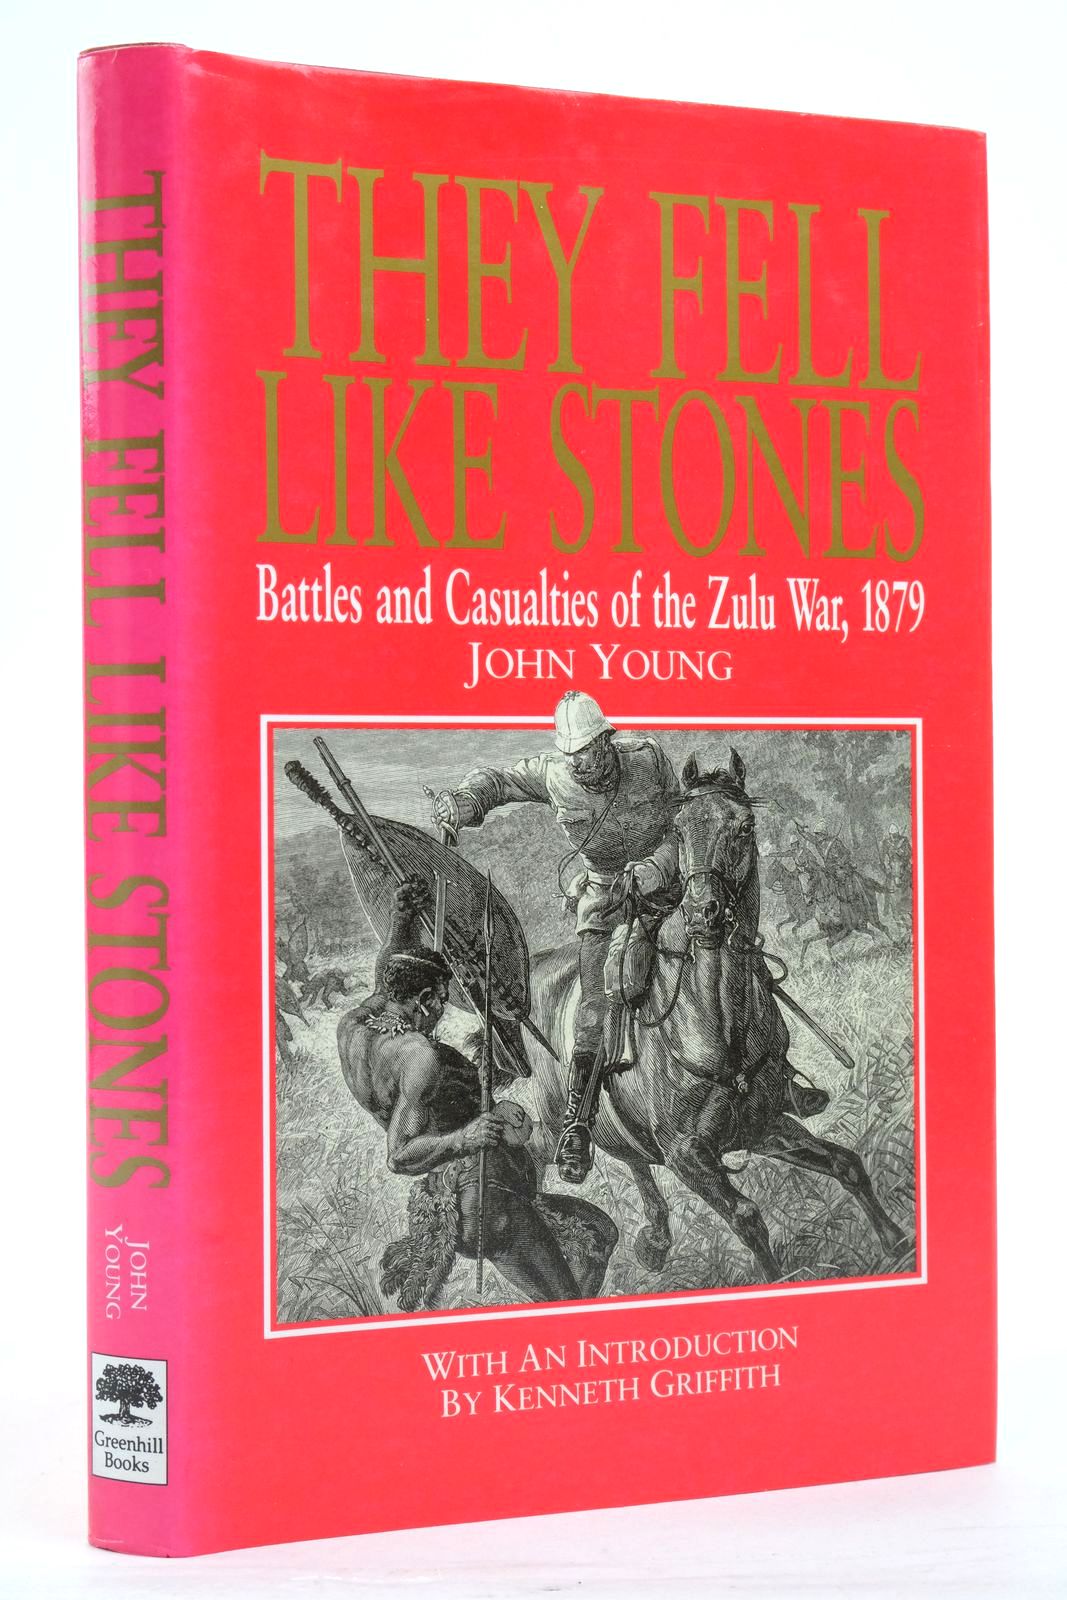 Photo of THEY FELL LIKE STONES BATTLES AND CASUALTIES OF THE ZULU WAR 1879 written by Young, John published by Greenhill Books (STOCK CODE: 2138035)  for sale by Stella & Rose's Books